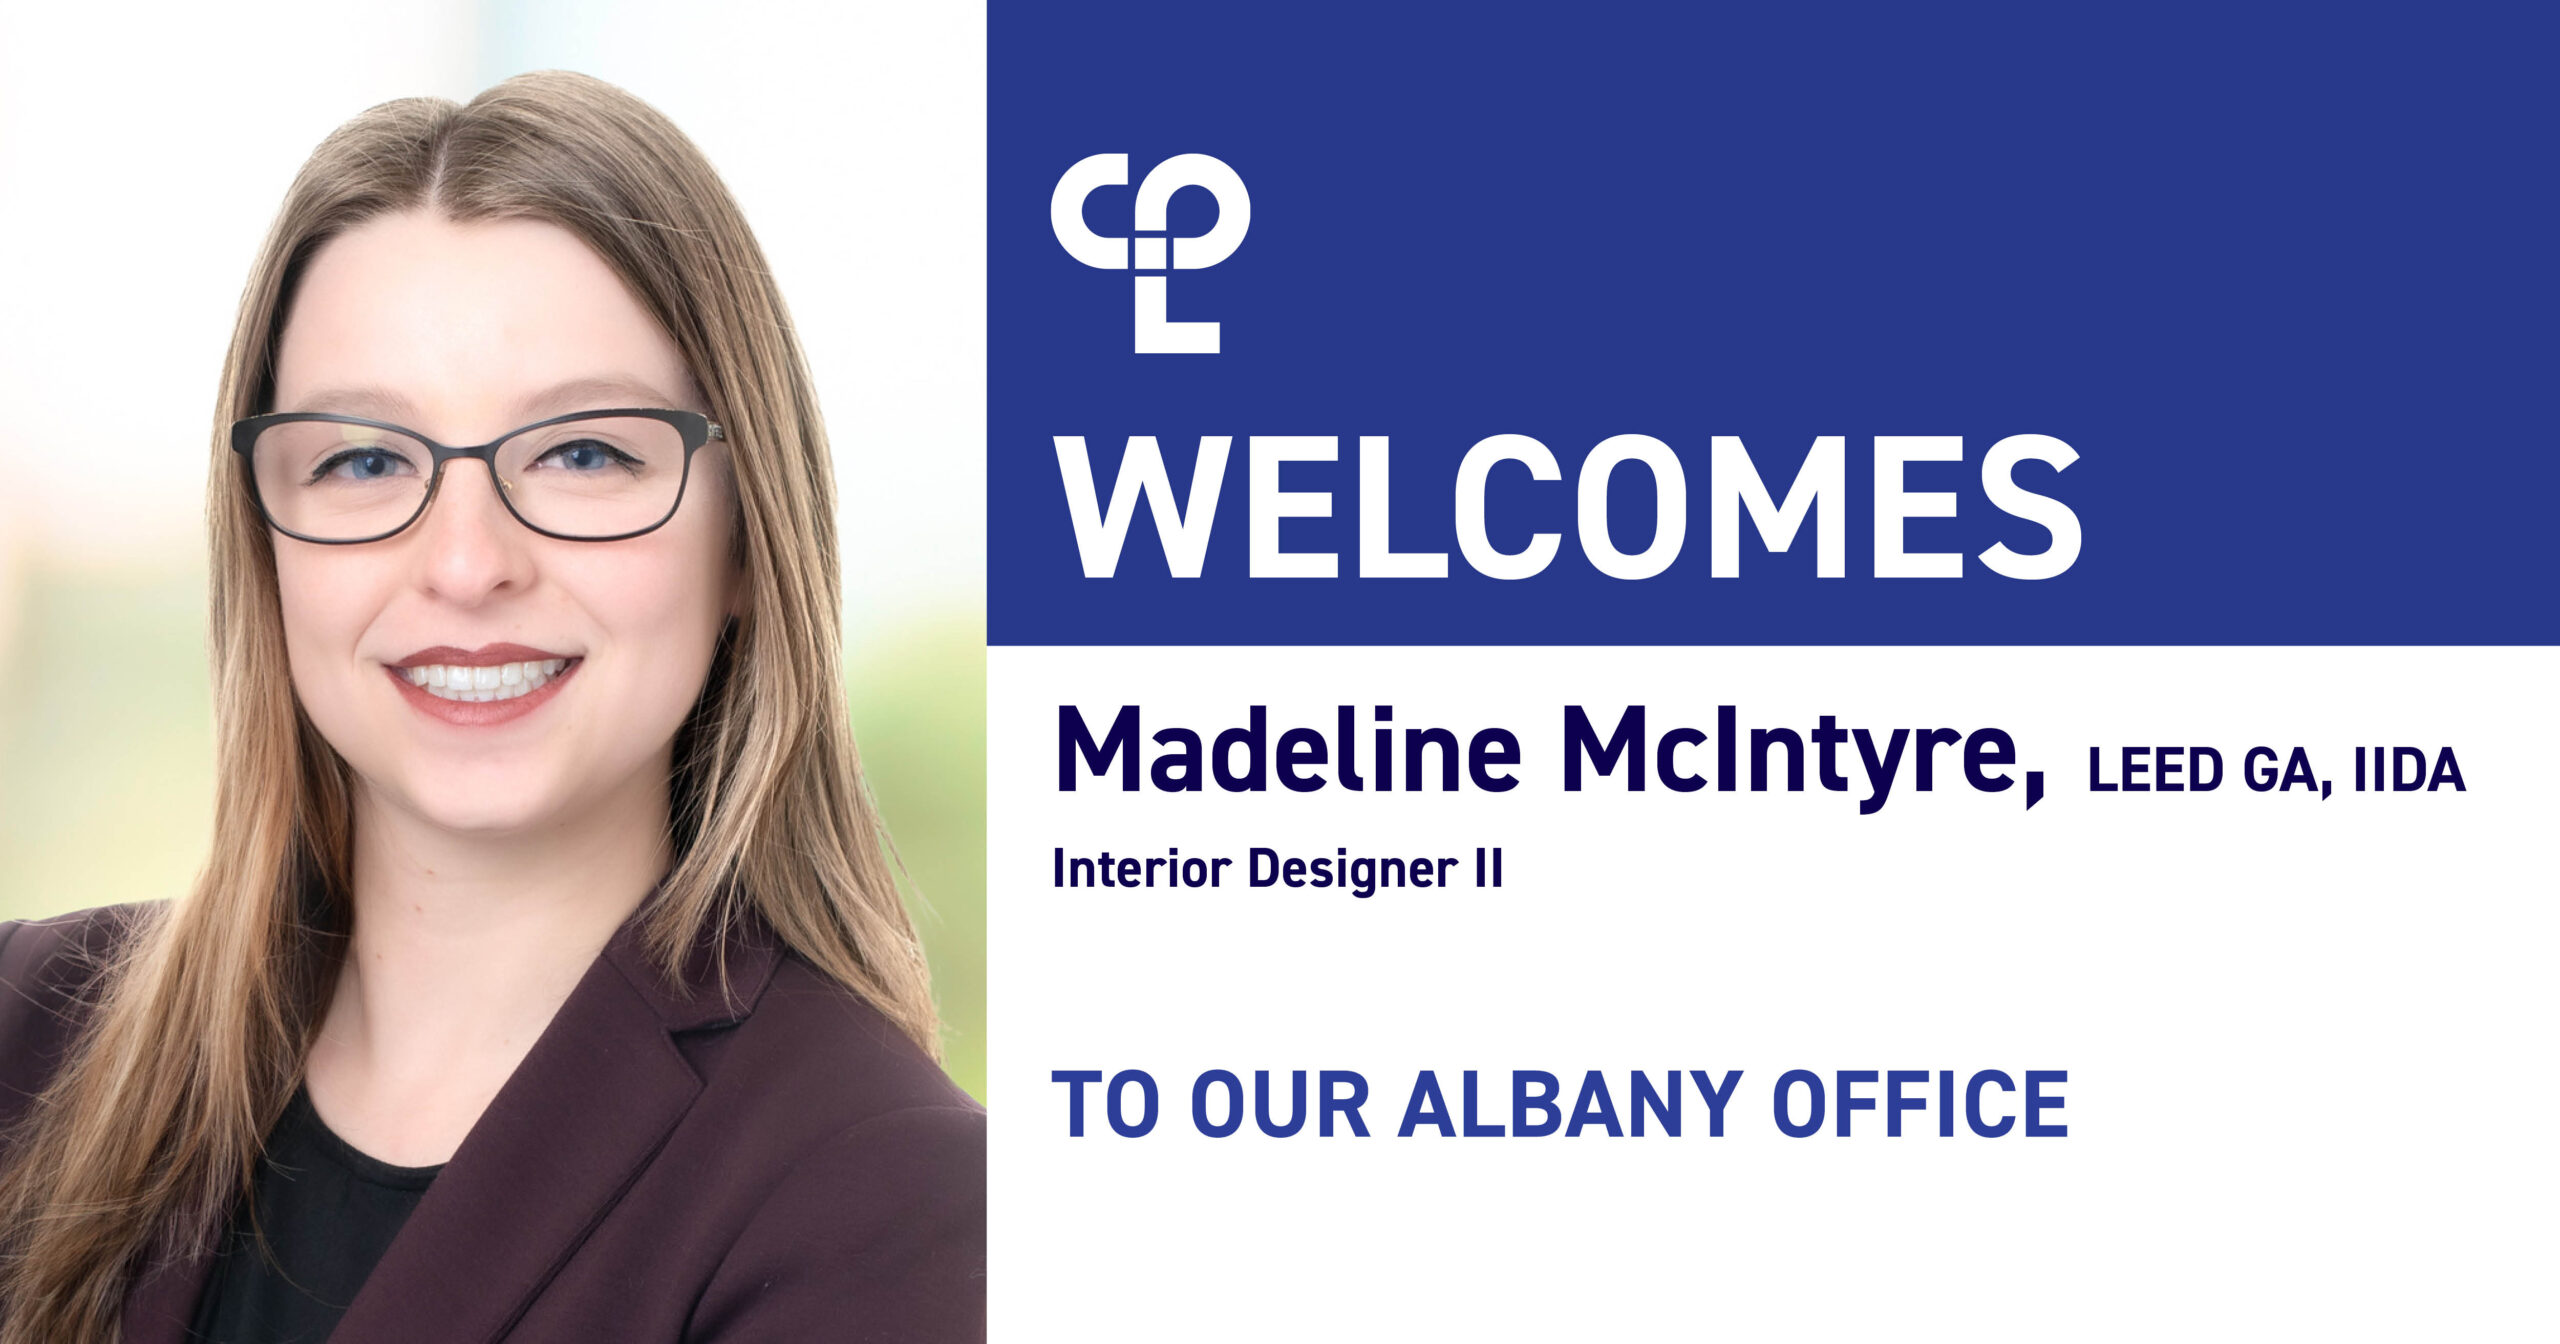 Smiling blonde woman with glasses on green background next to text that reads "CPL Welcomes Madeline McIntyre, LEED GA, IIDA, Interior Designer II to our Albany Office"